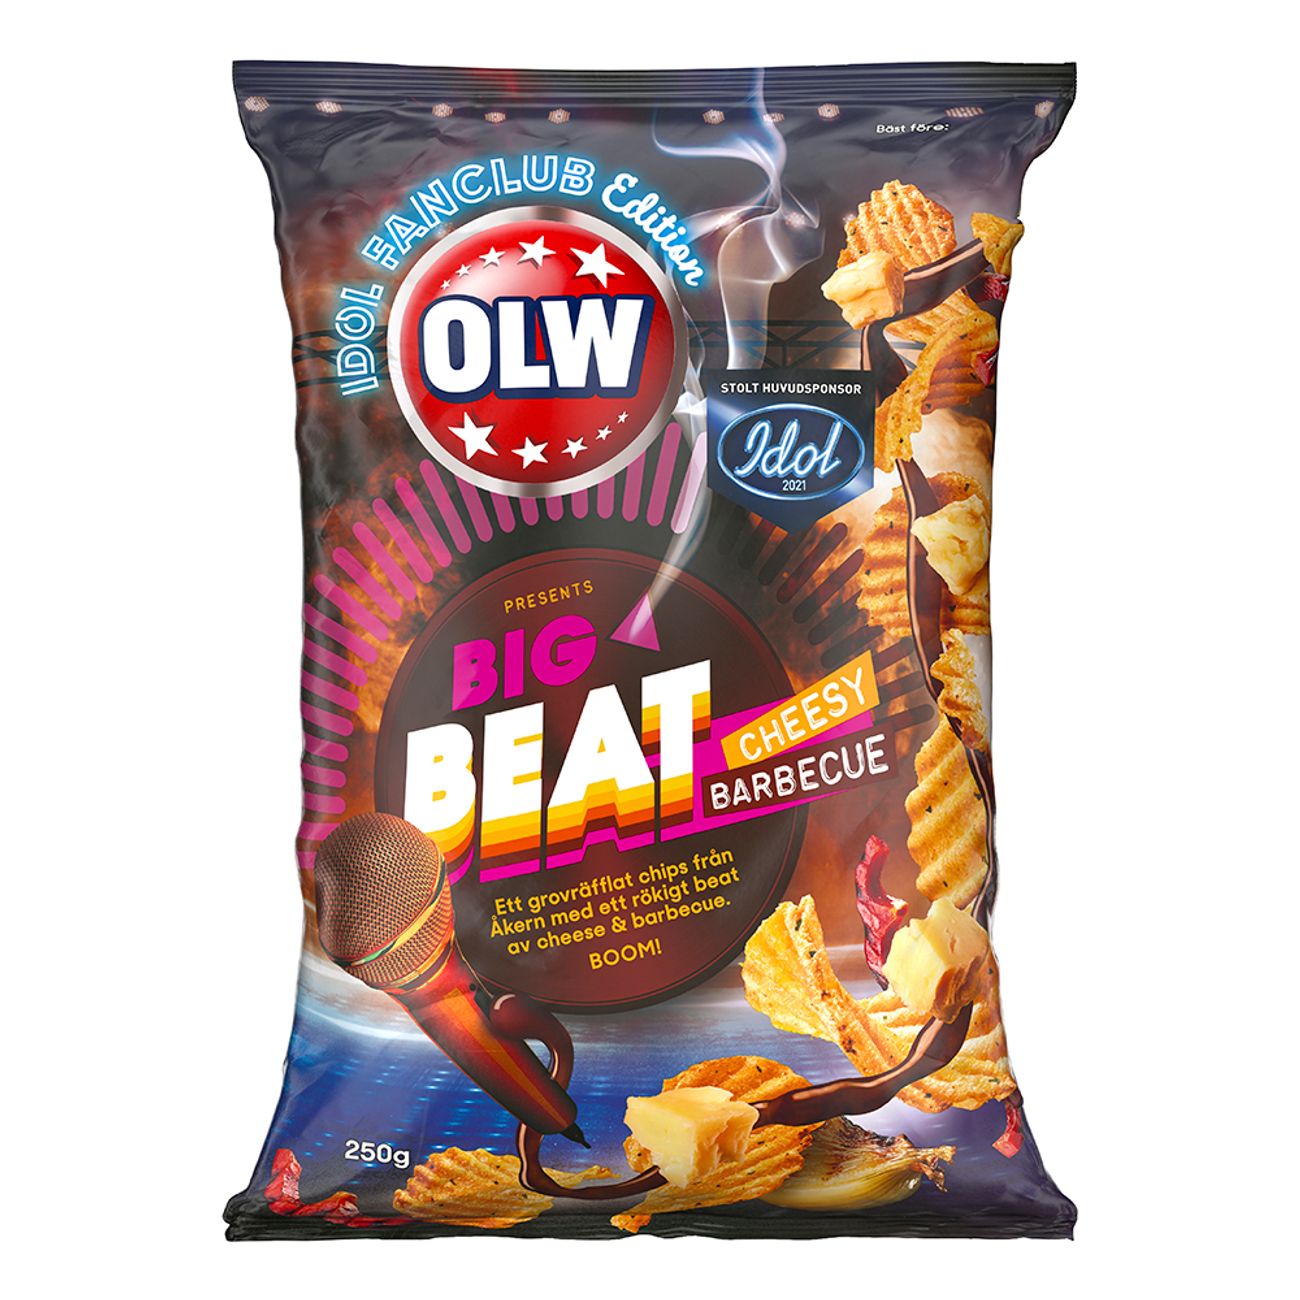 olw-big-beat-cheesy-barbecue-limited-edition-77619-2